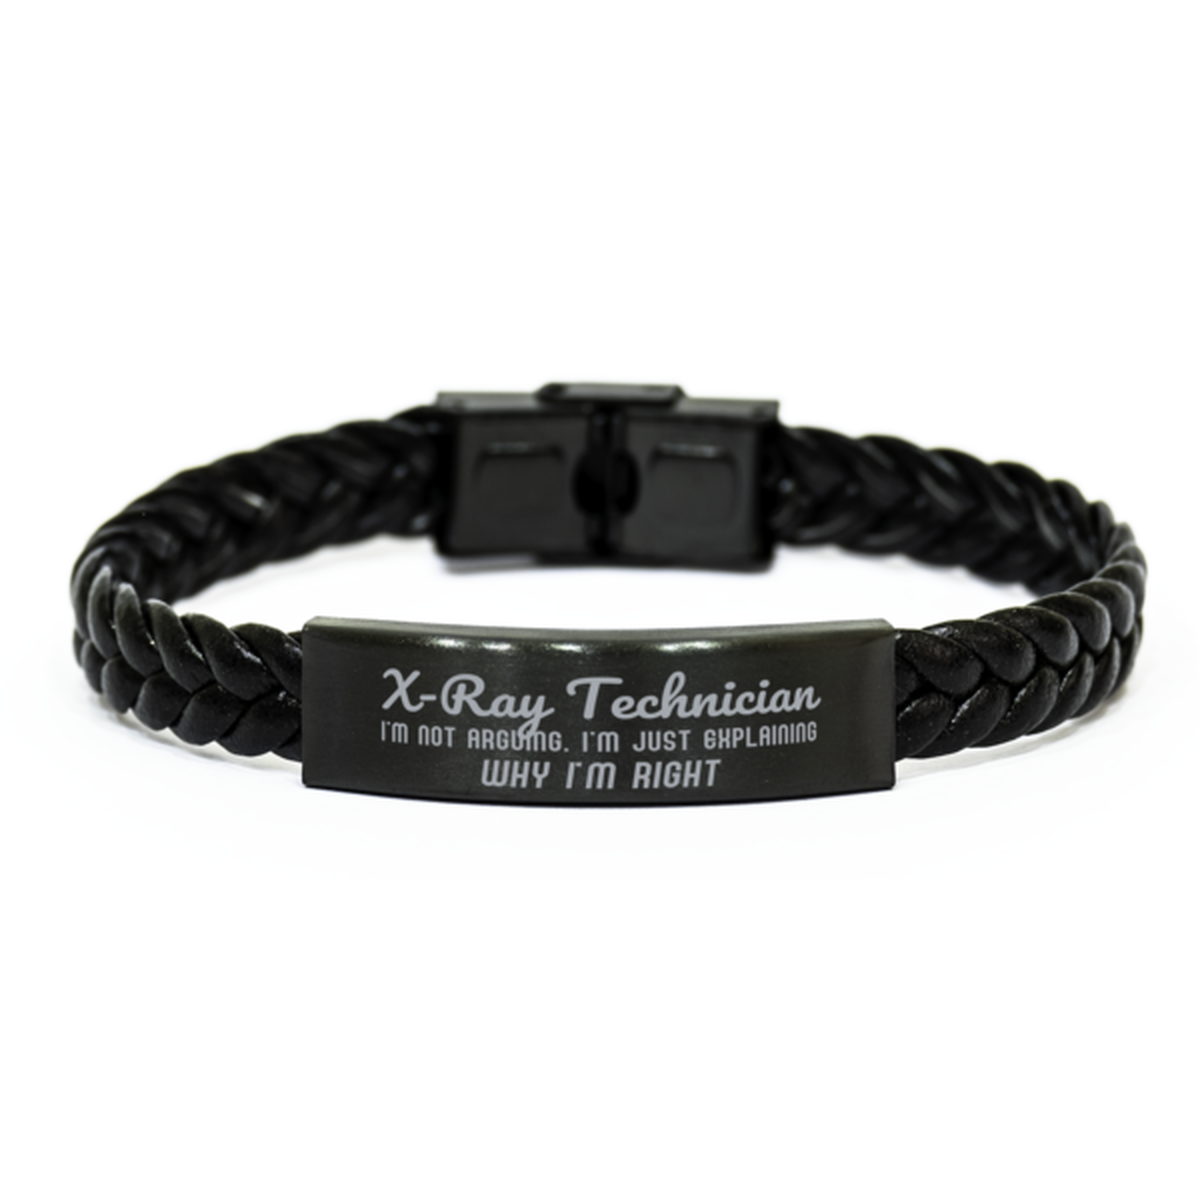 X-Ray Technician I'm not Arguing. I'm Just Explaining Why I'm RIGHT Braided Leather Bracelet, Graduation Birthday Christmas X-Ray Technician Gifts For X-Ray Technician Funny Saying Quote Present for Men Women Coworker